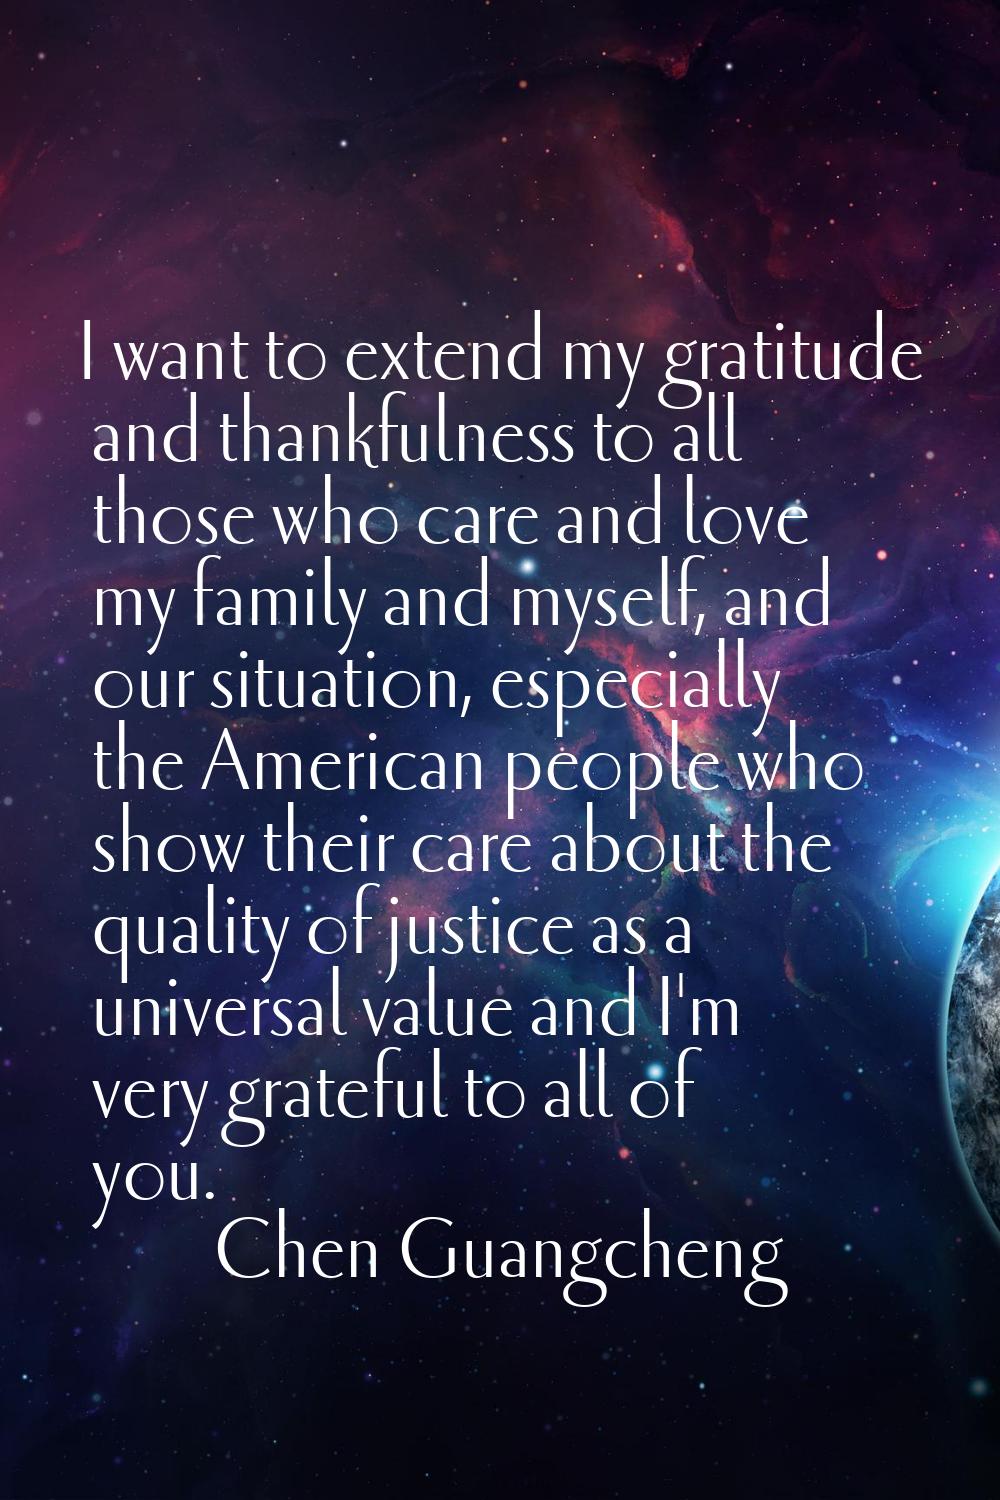 I want to extend my gratitude and thankfulness to all those who care and love my family and myself,